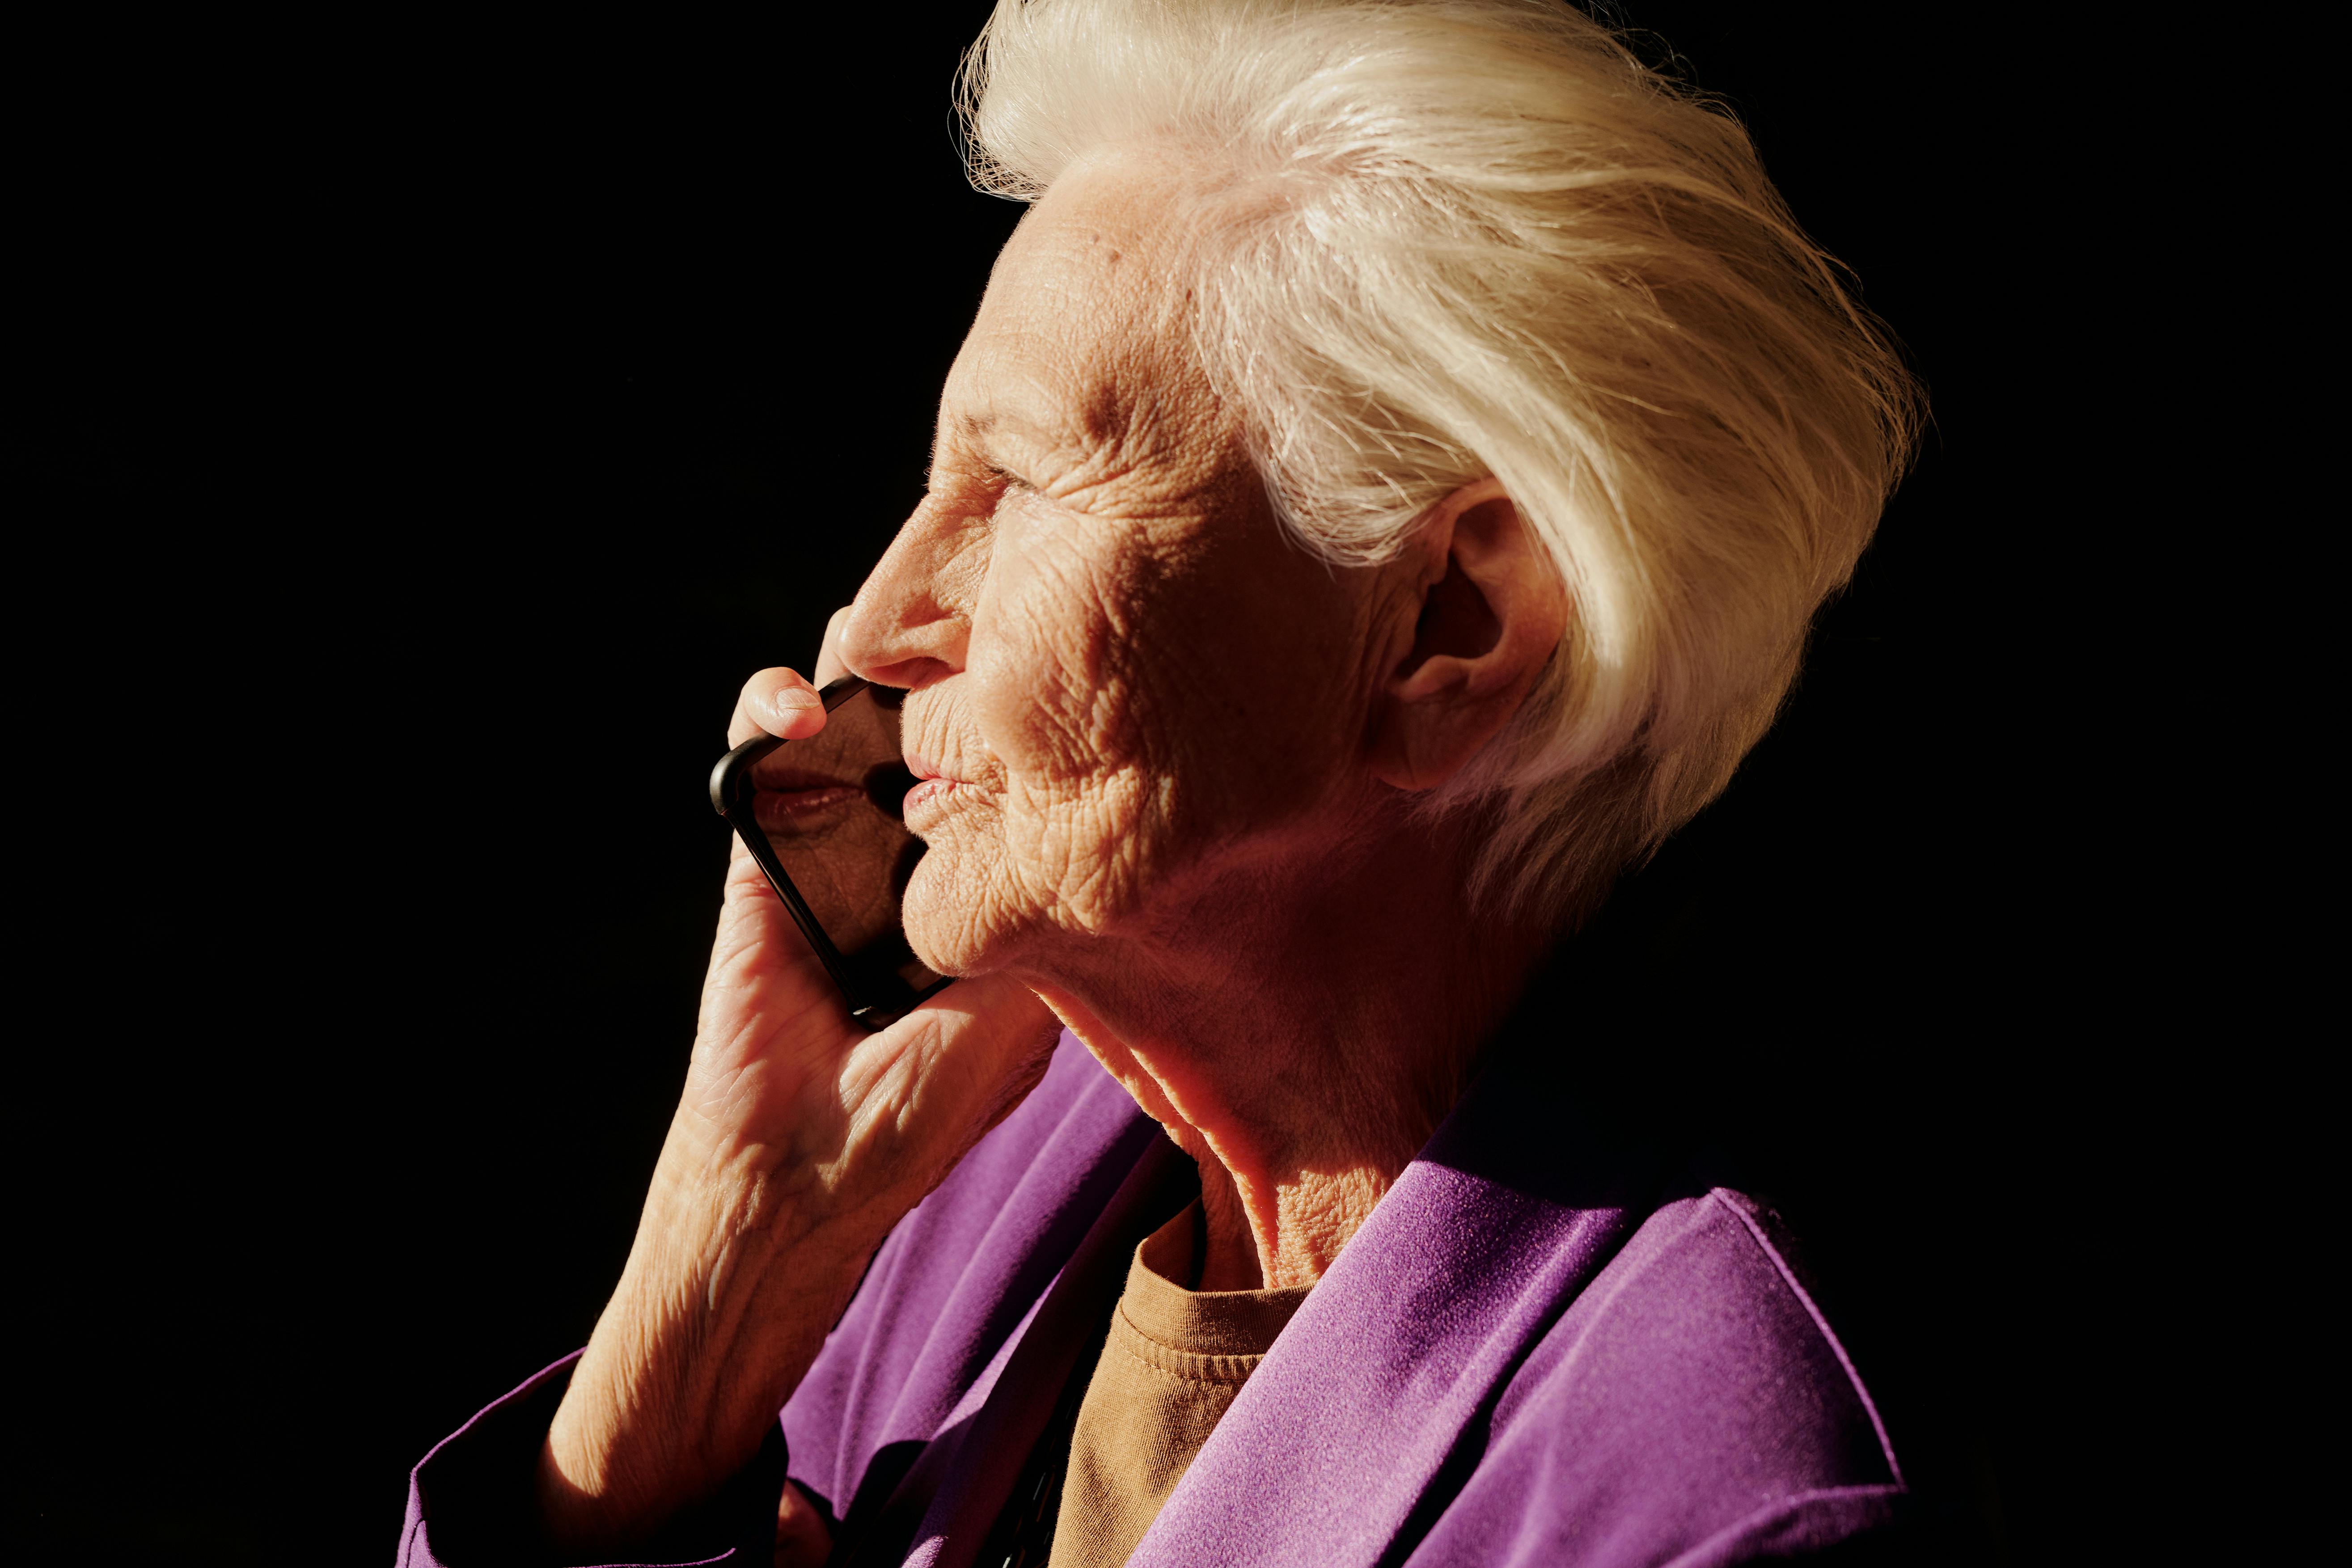 A senior woman on a call | Source: Pexels